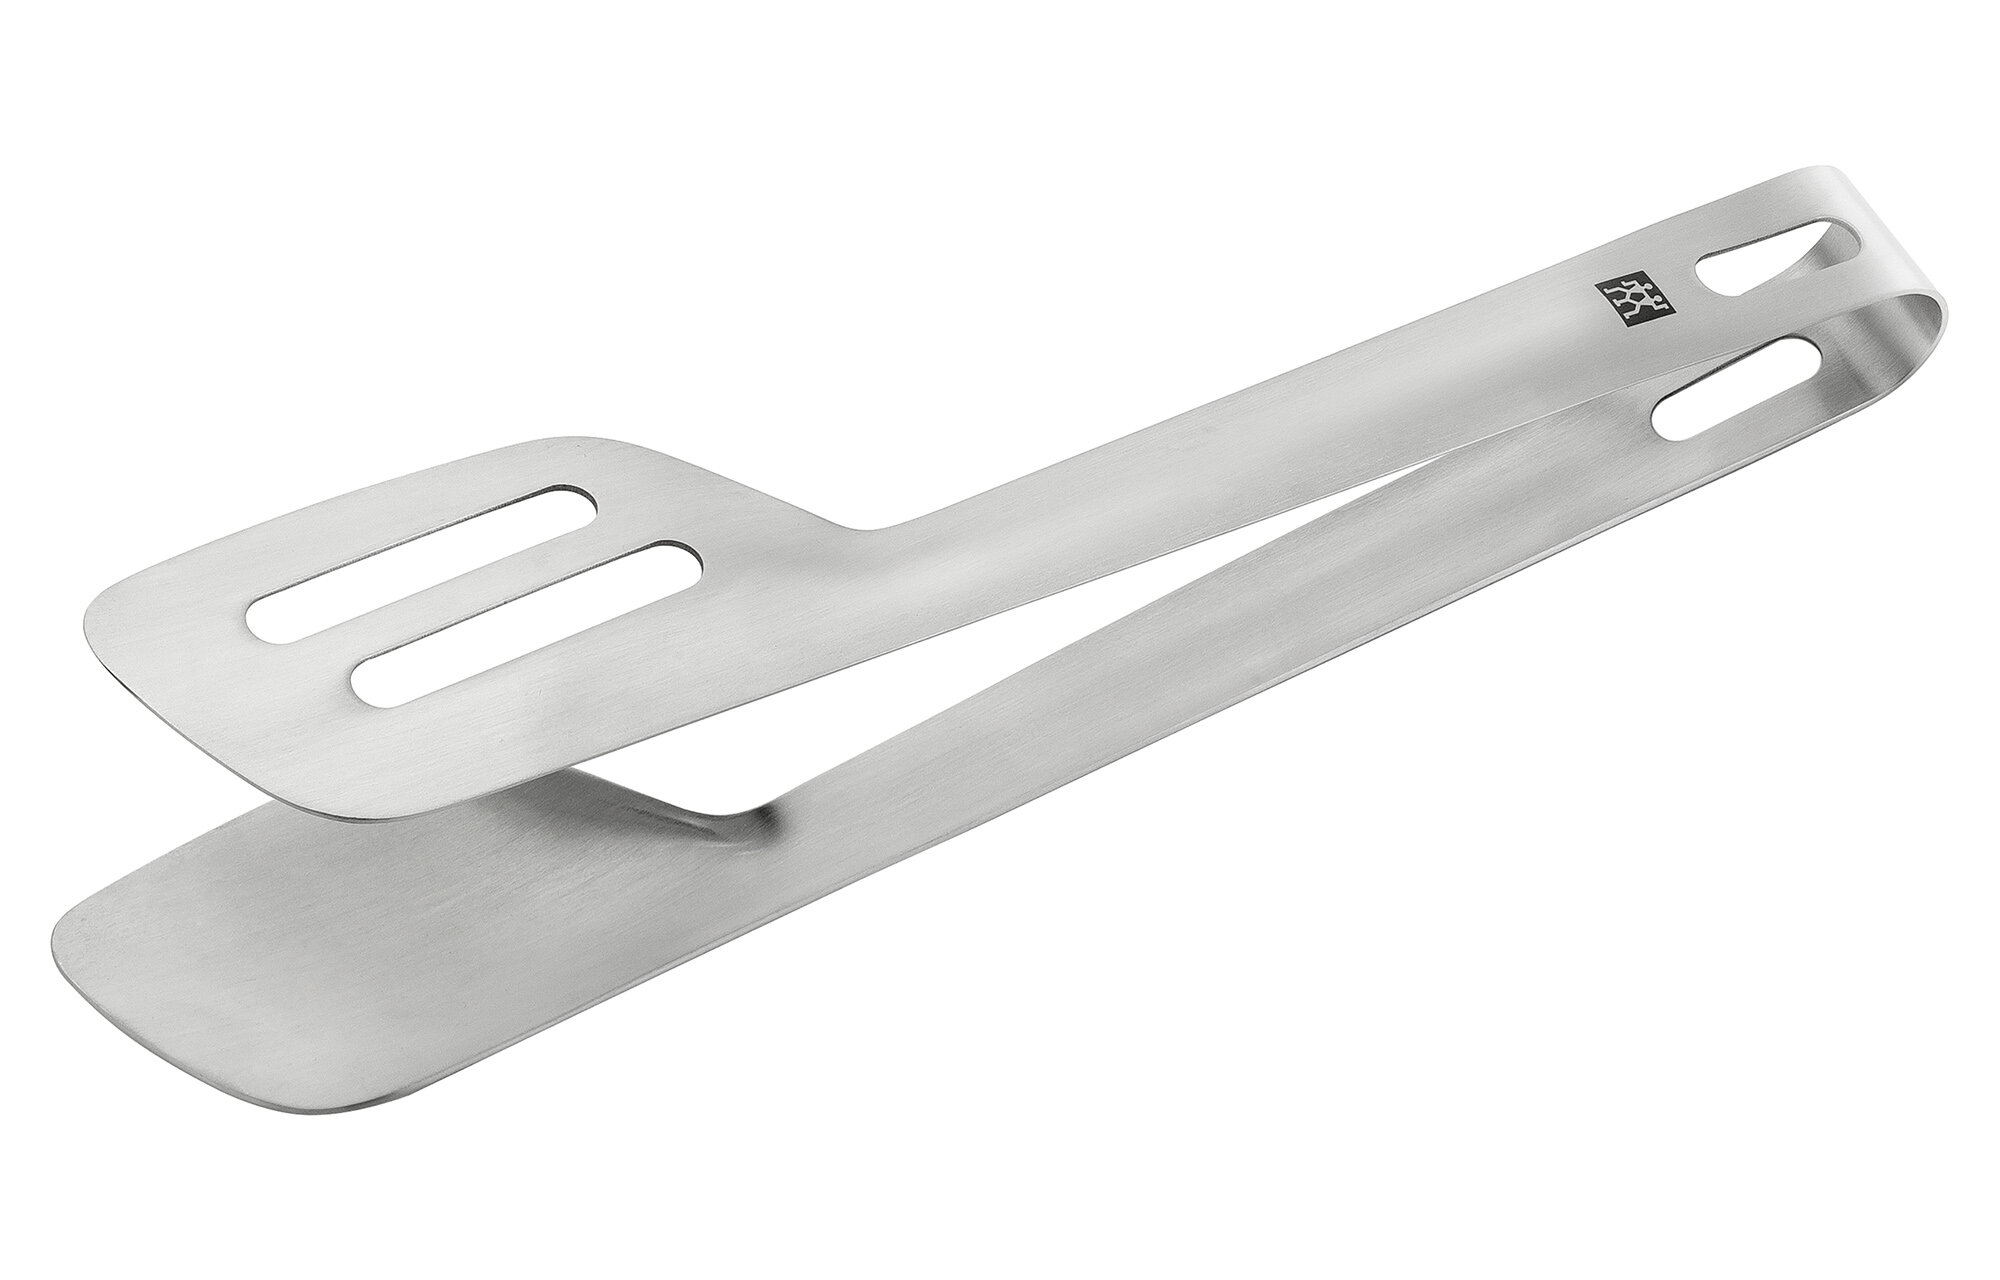 Zyliss Cook Serve Kitchen Silicone-Tipped Tongs & Reviews